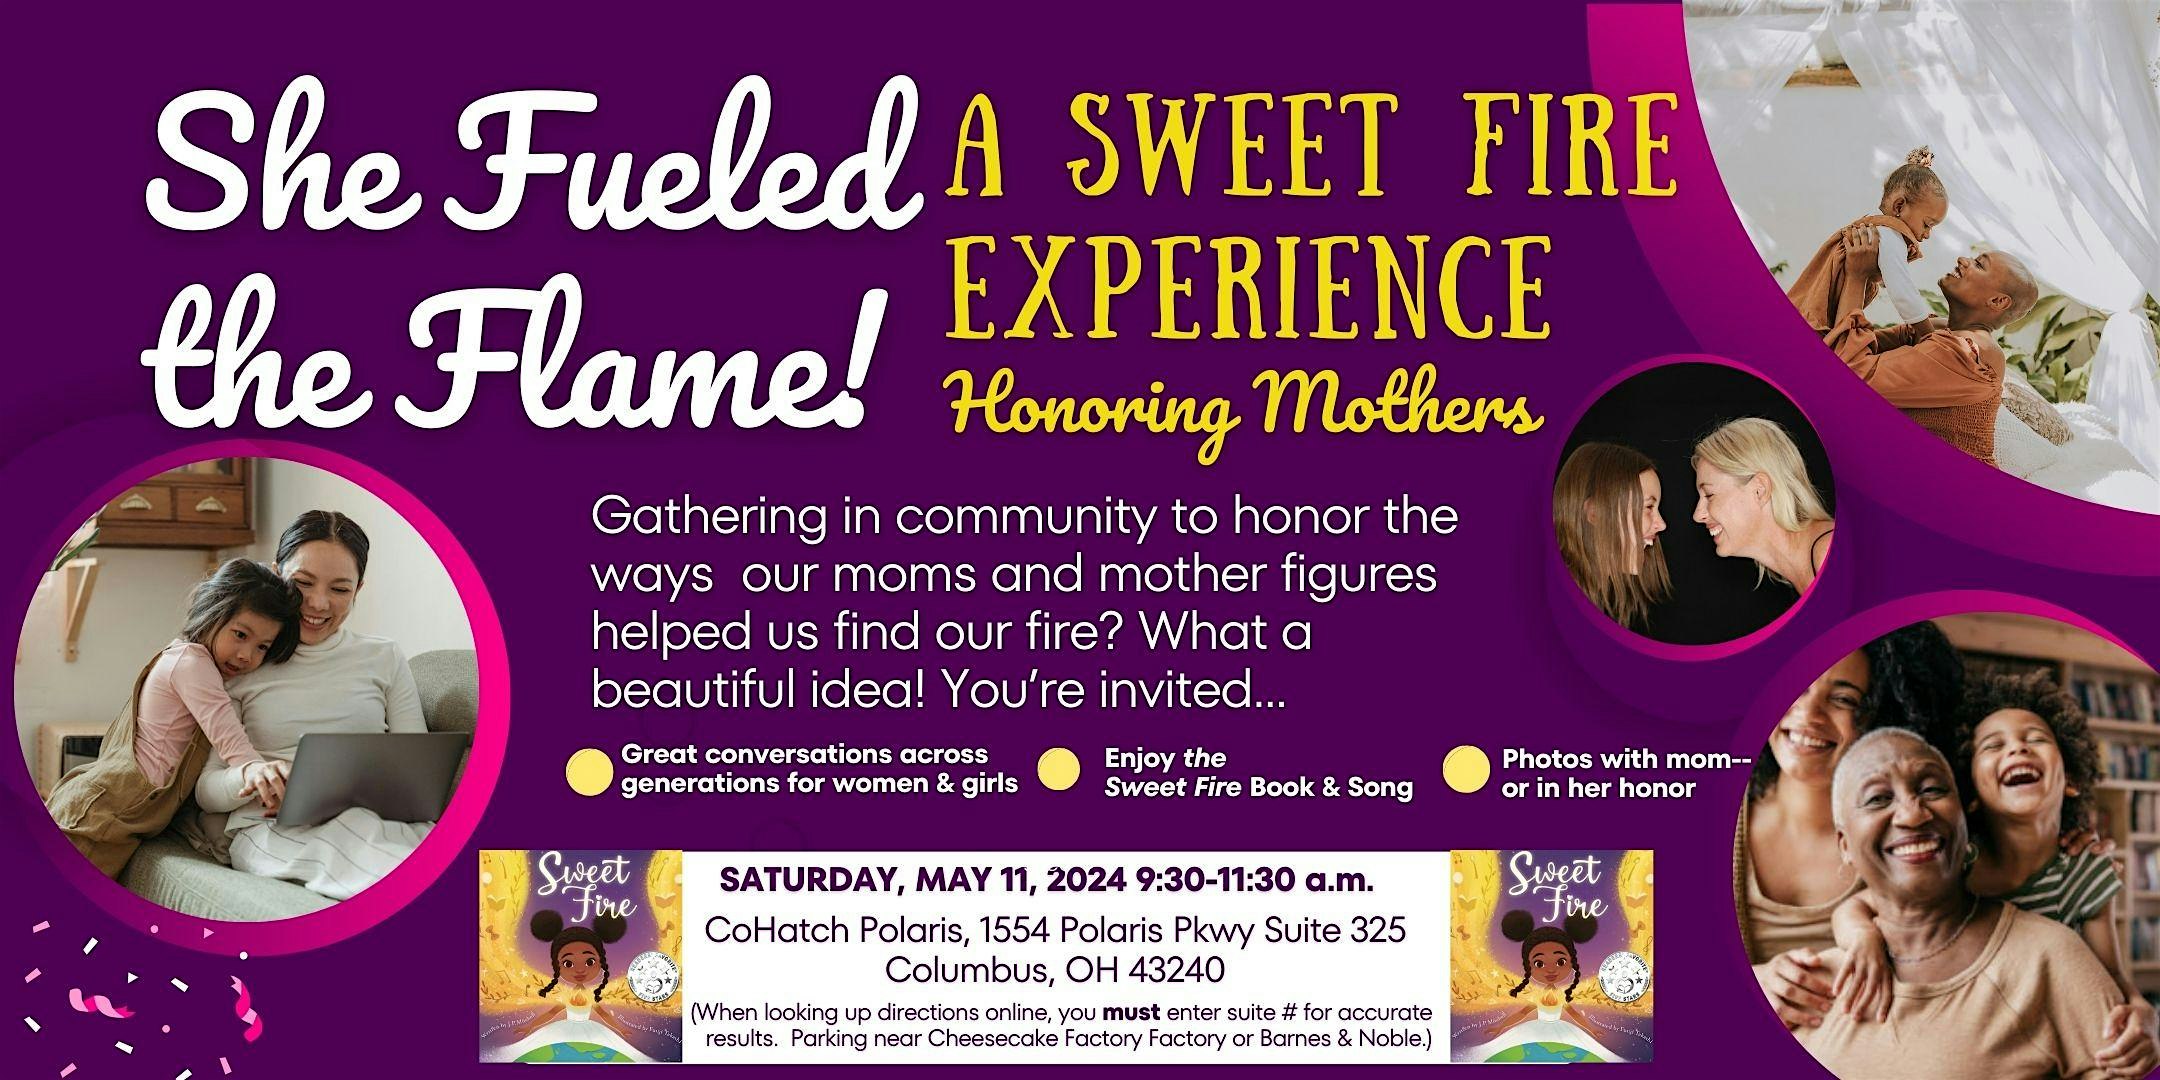 She Fueled the Flame!: A Sweet Fire Experience Honoring Mothers